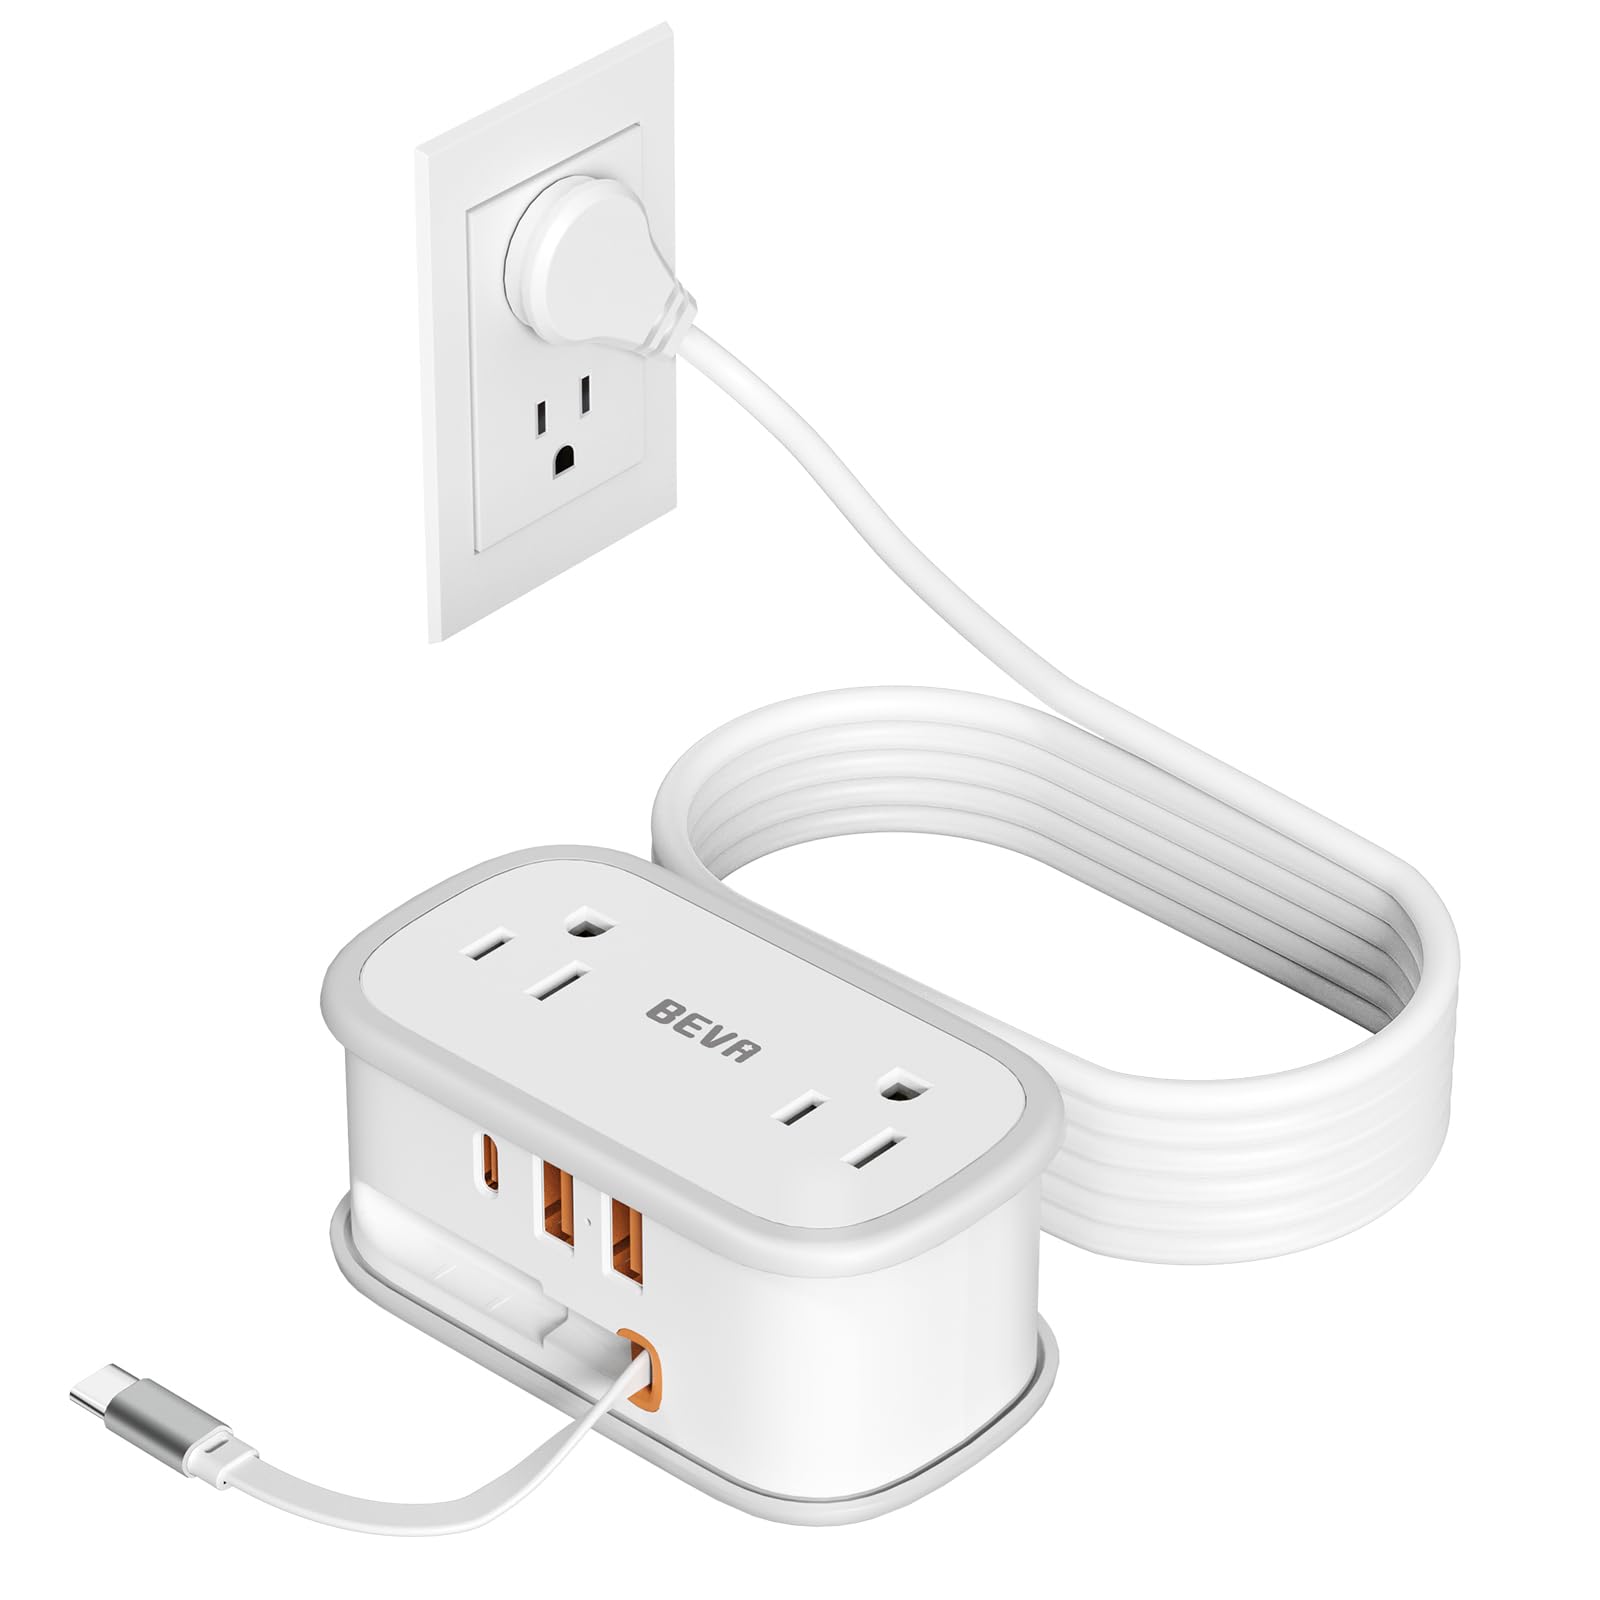 BEVA Travel Power Strip with 1.5 FT USB C Cable for $11.99@Amazon